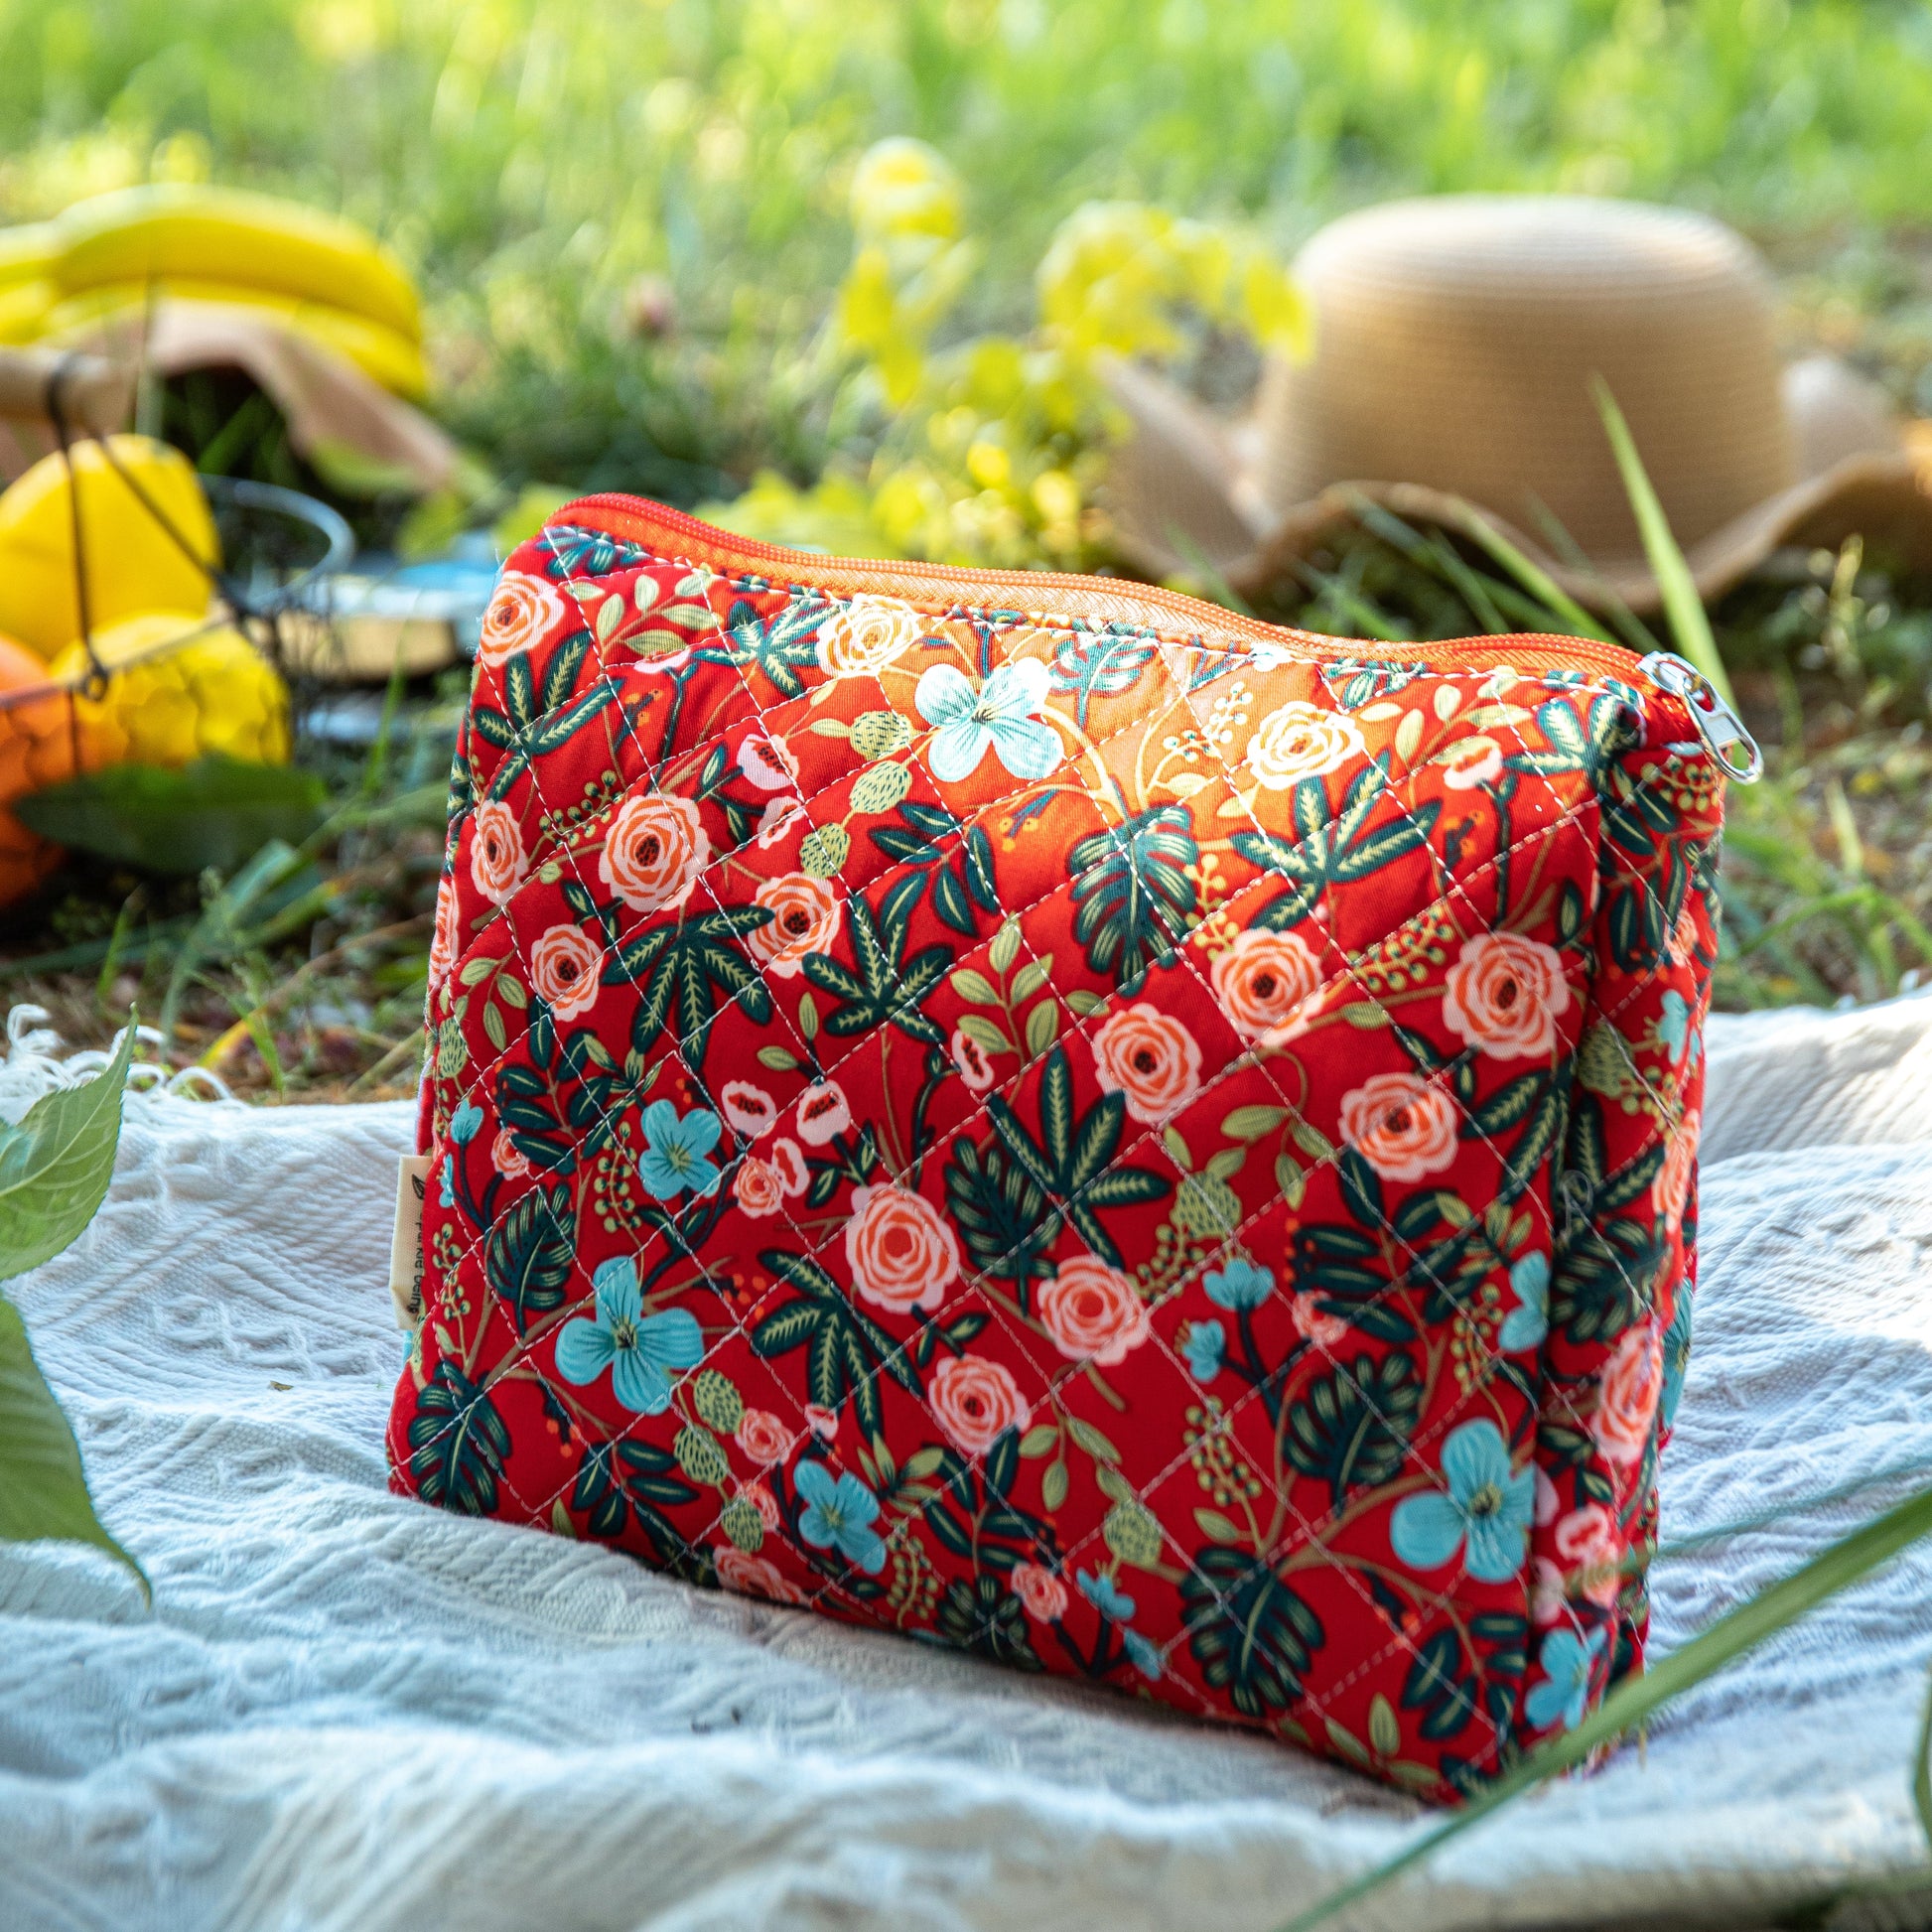 Floral Quilted Makeup Pouch - Travel-Friendly Cosmetic Bag